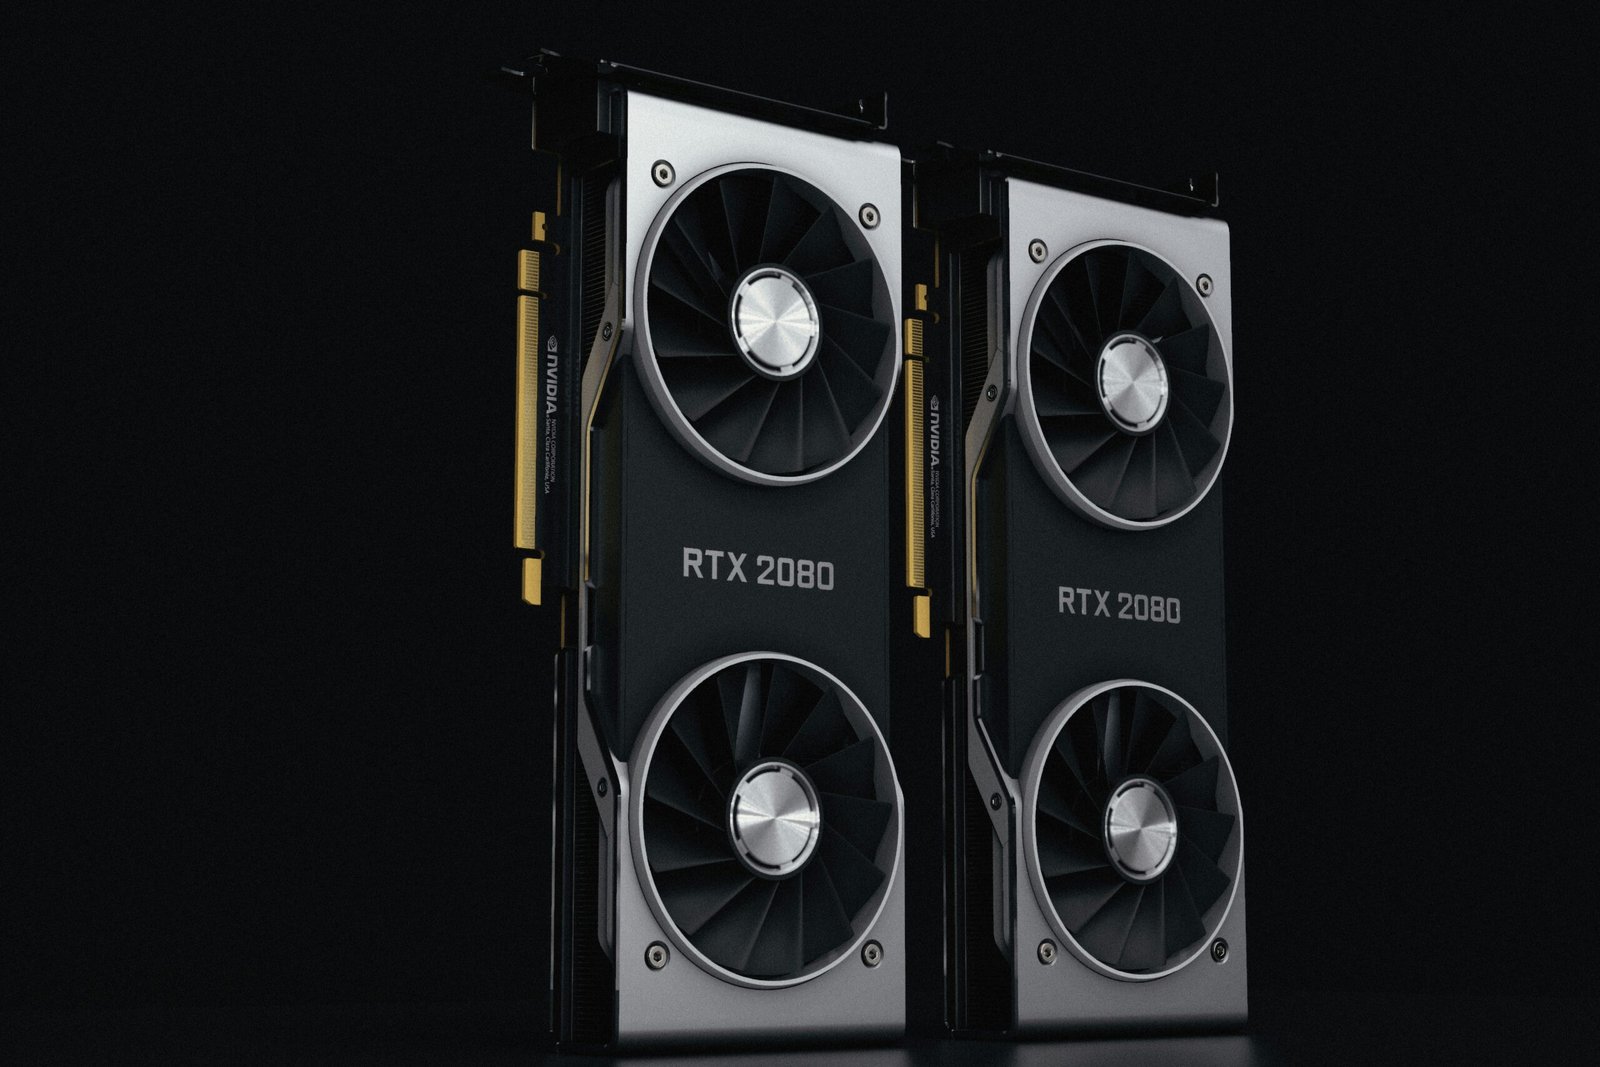 The Top GPUs for Crypto Mining